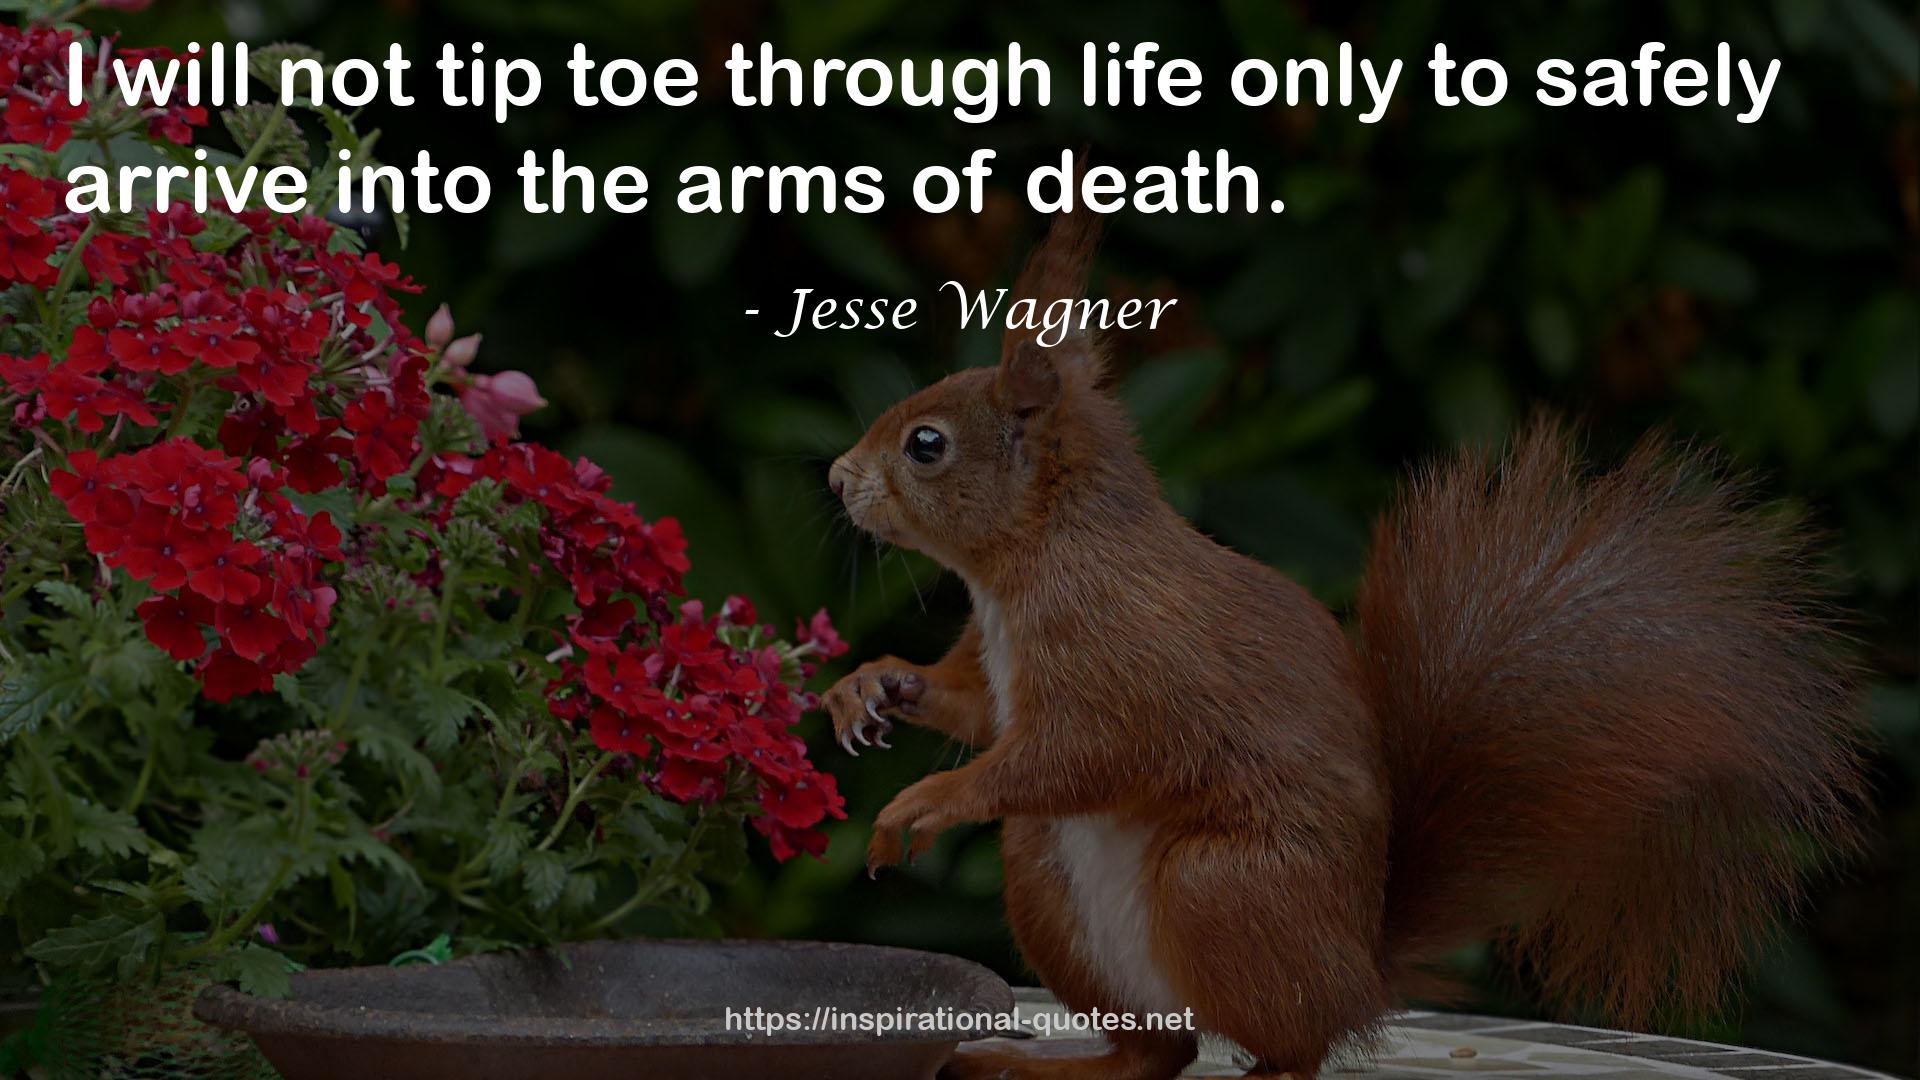 Jesse Wagner QUOTES